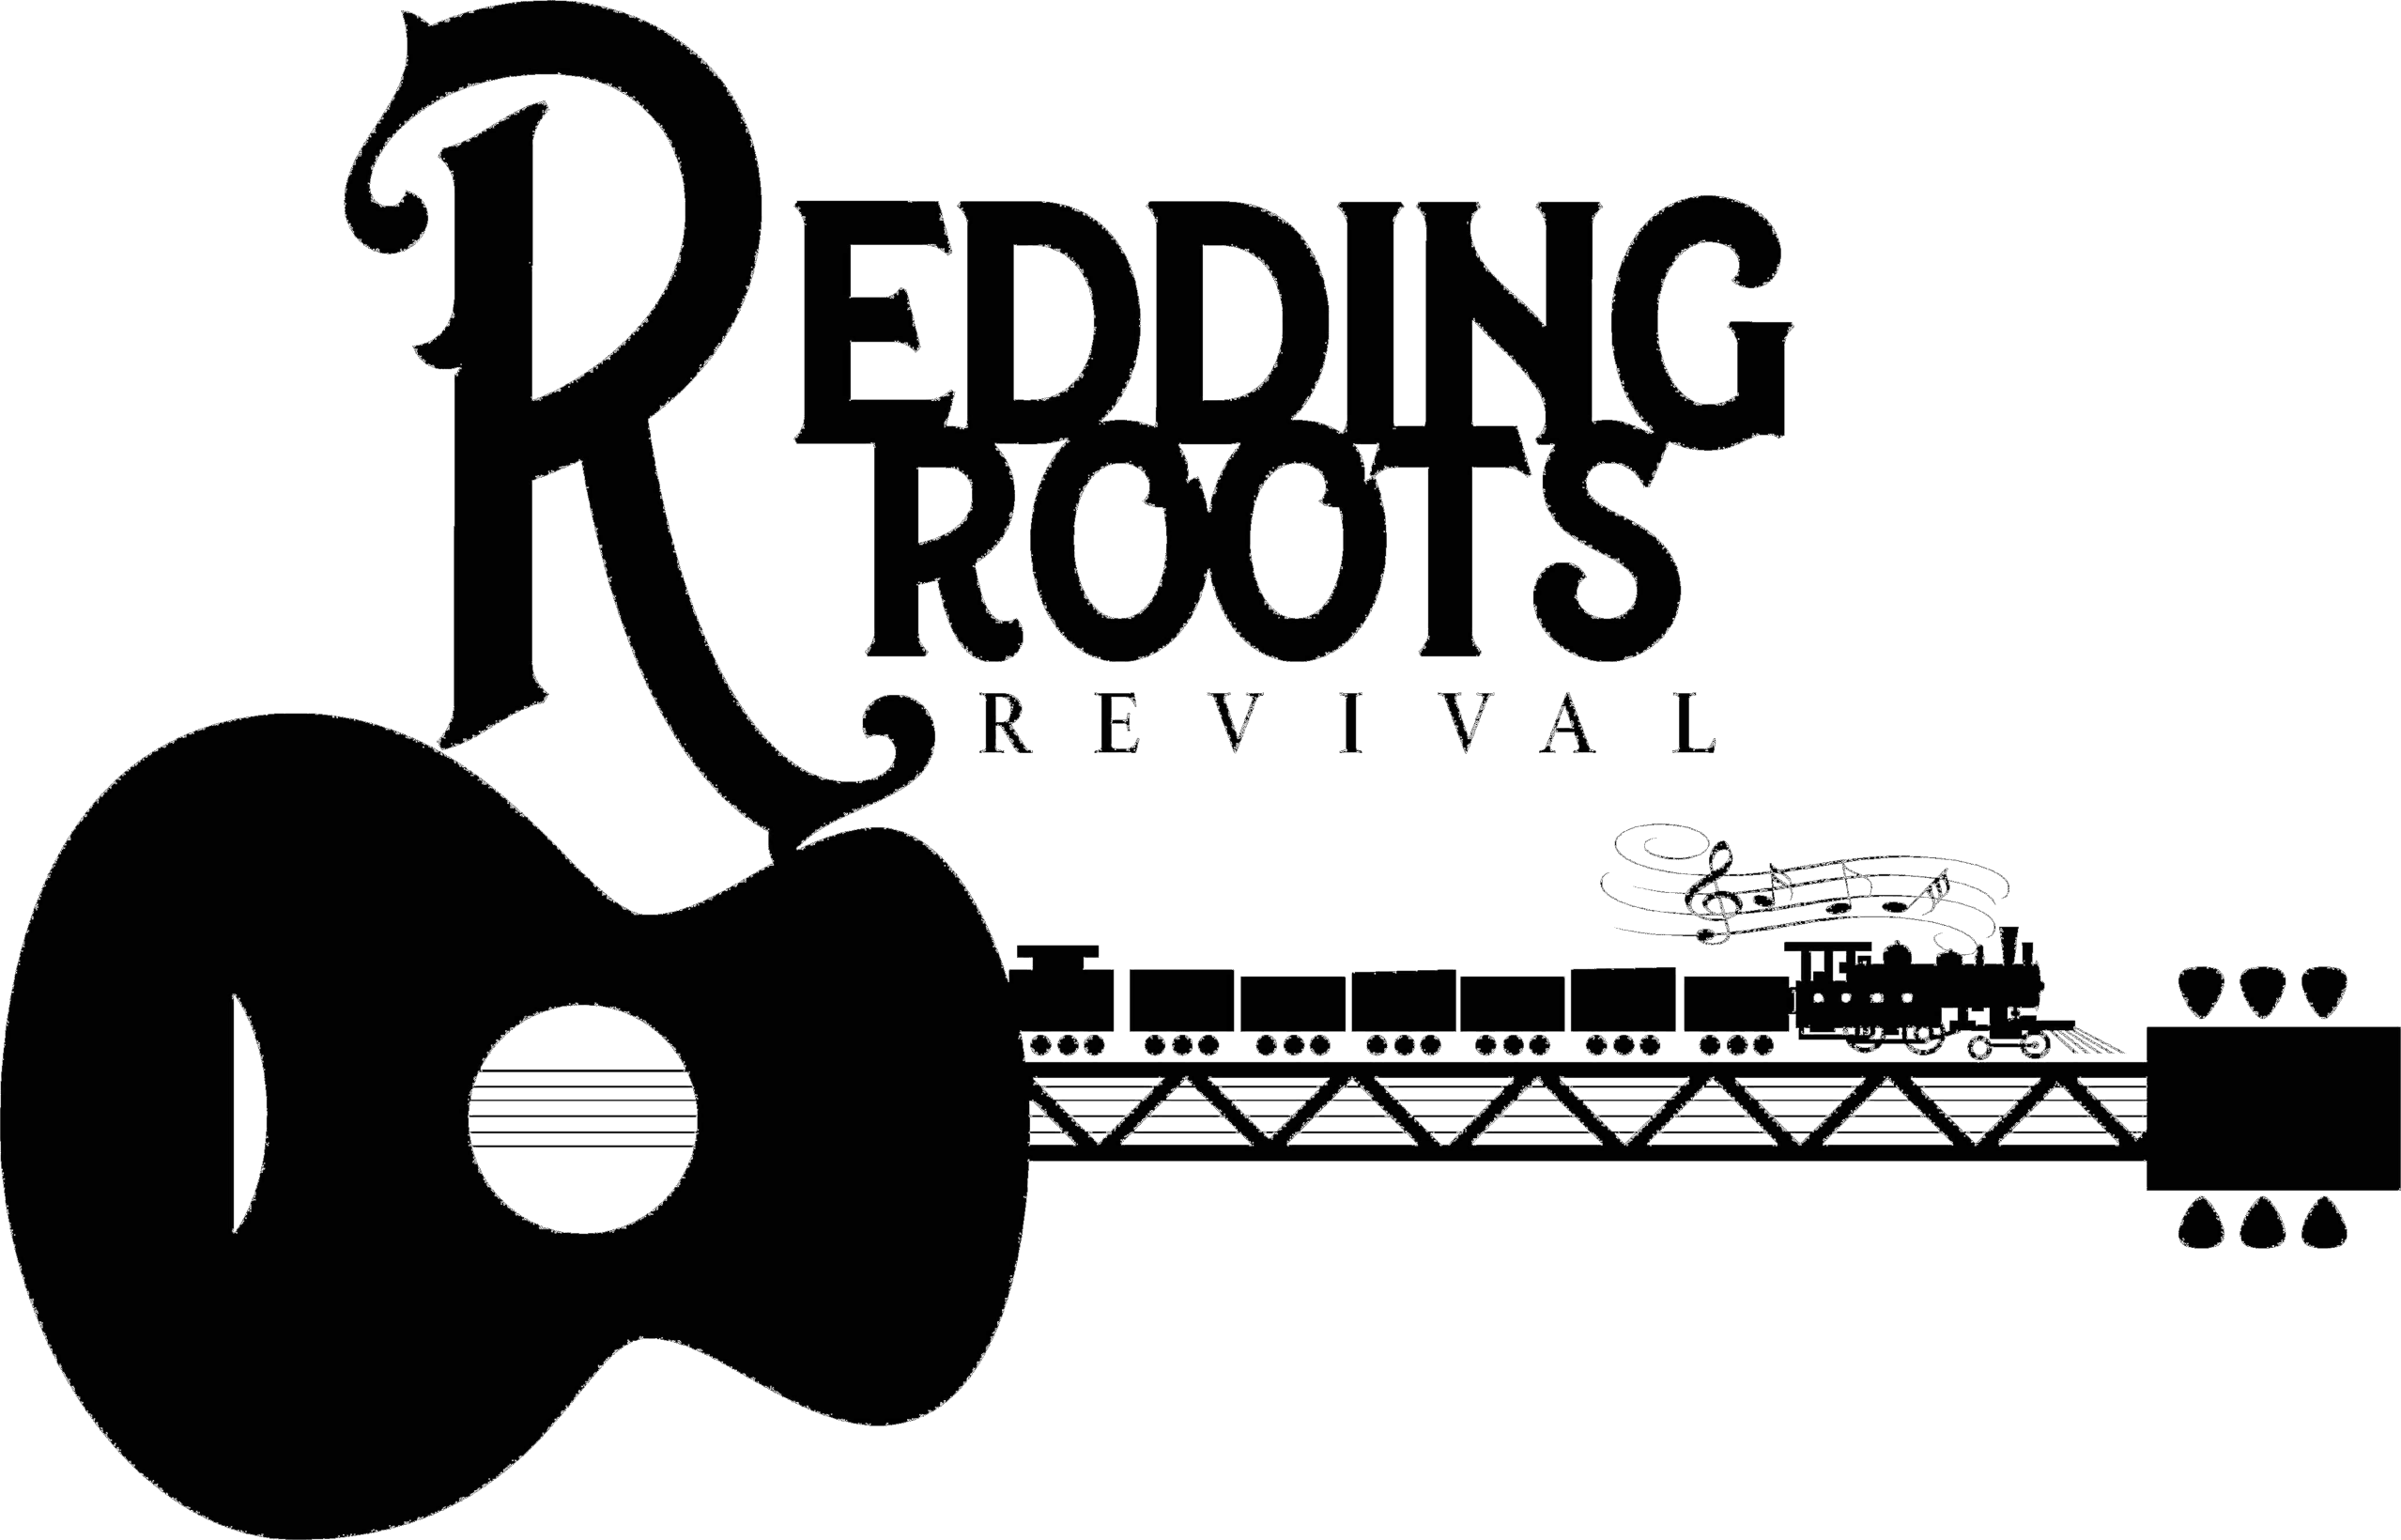 Redding Roots Revival